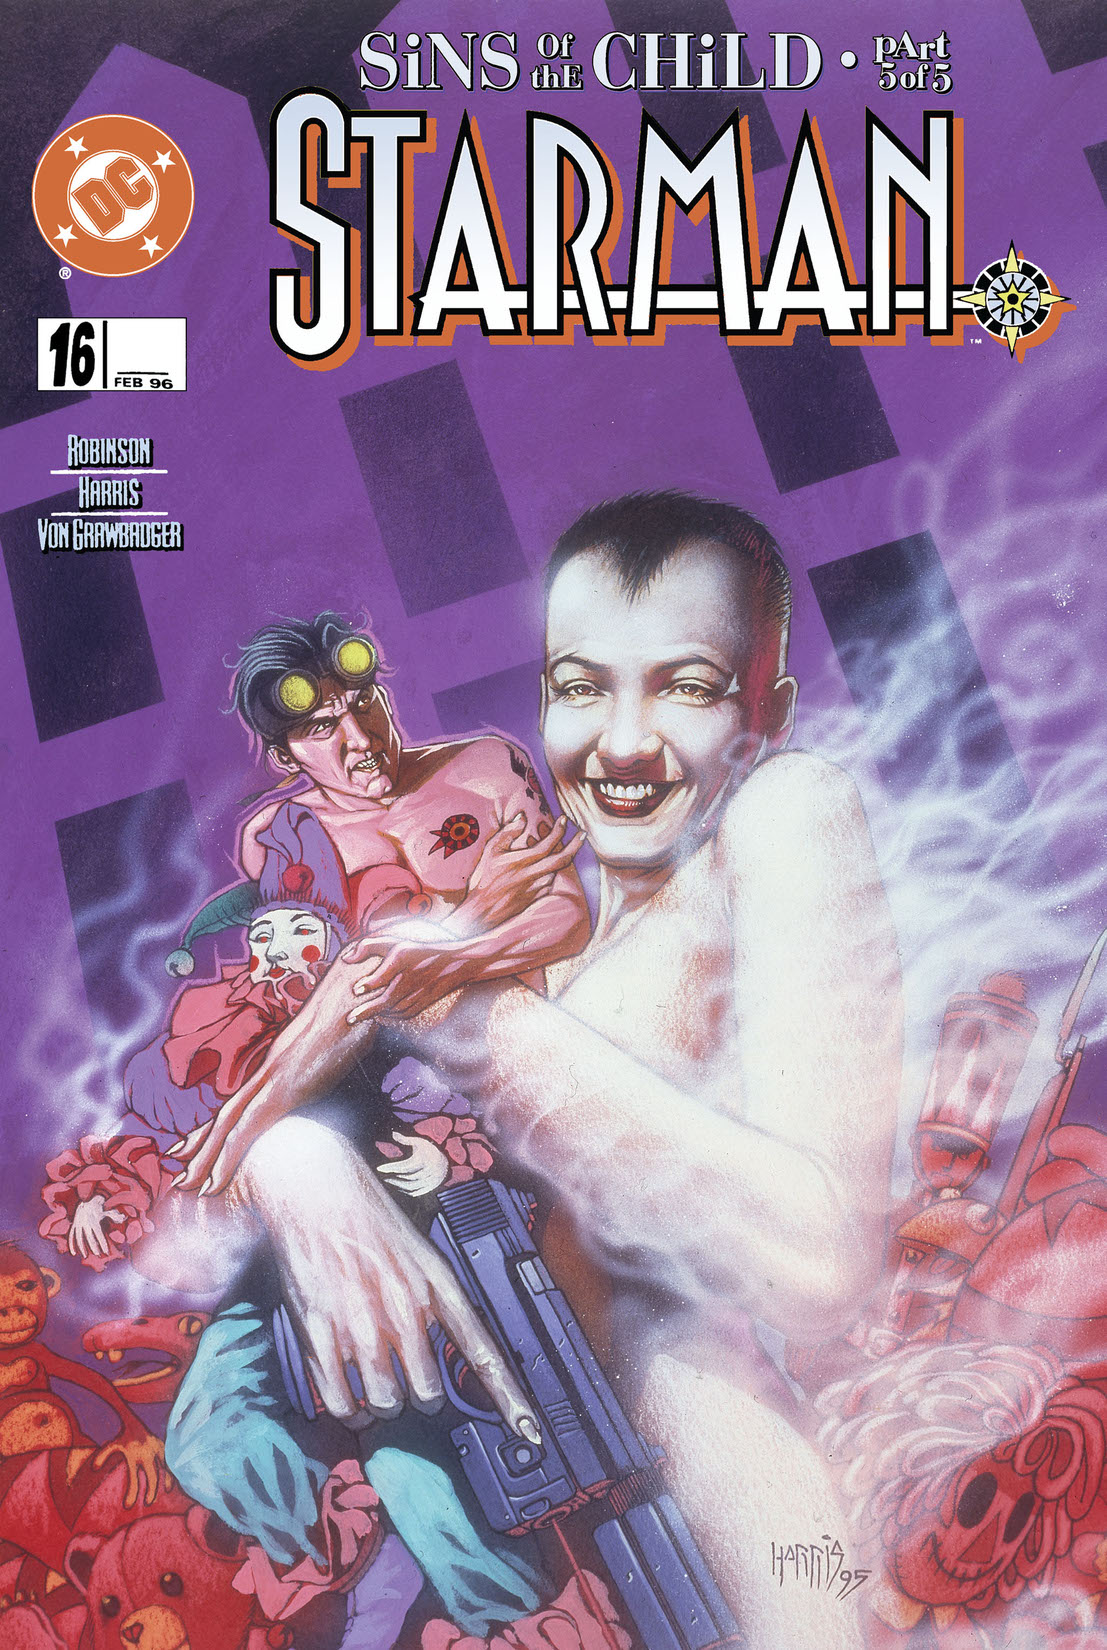 Starman (1994-) #16 preview images